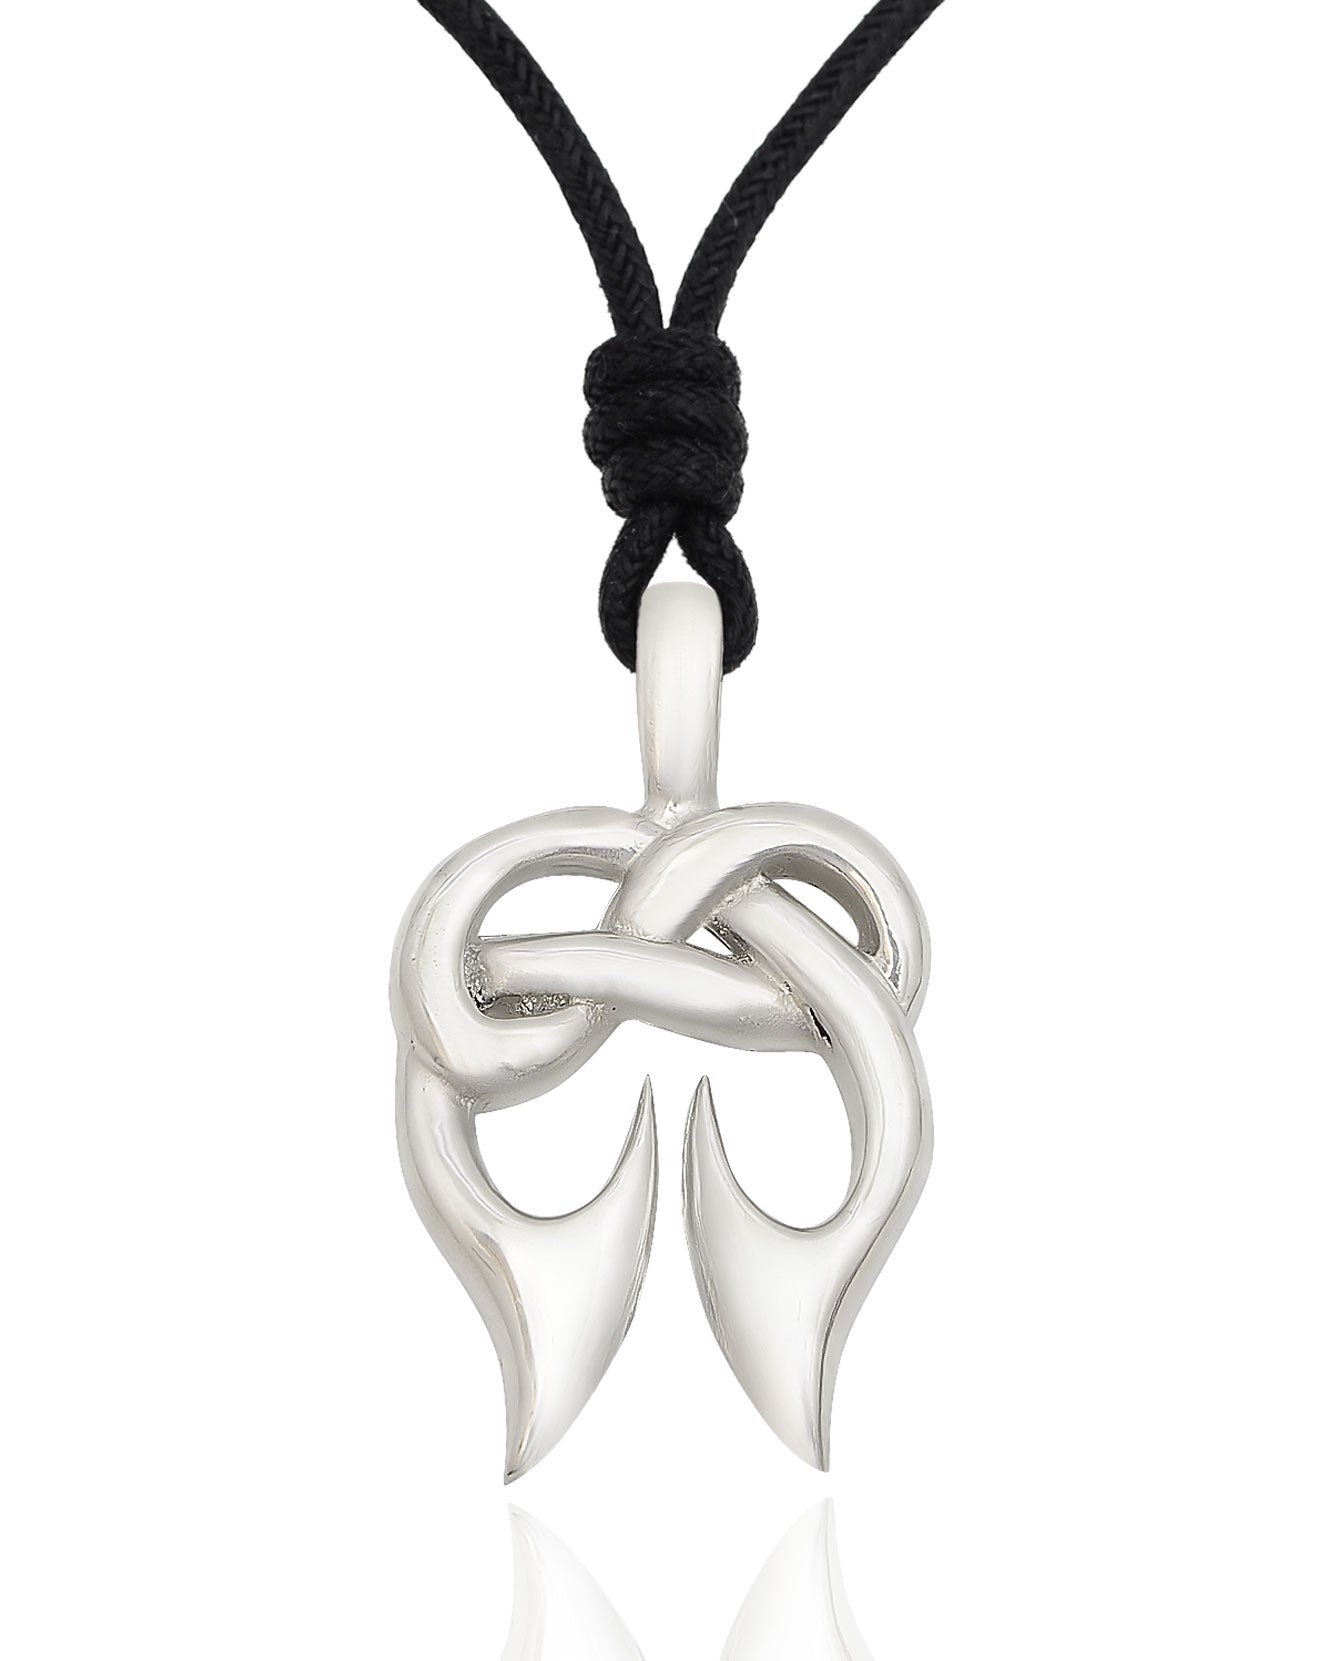 Classic Maori Fishing Hook Silver Pewter Charm Necklace Pendant